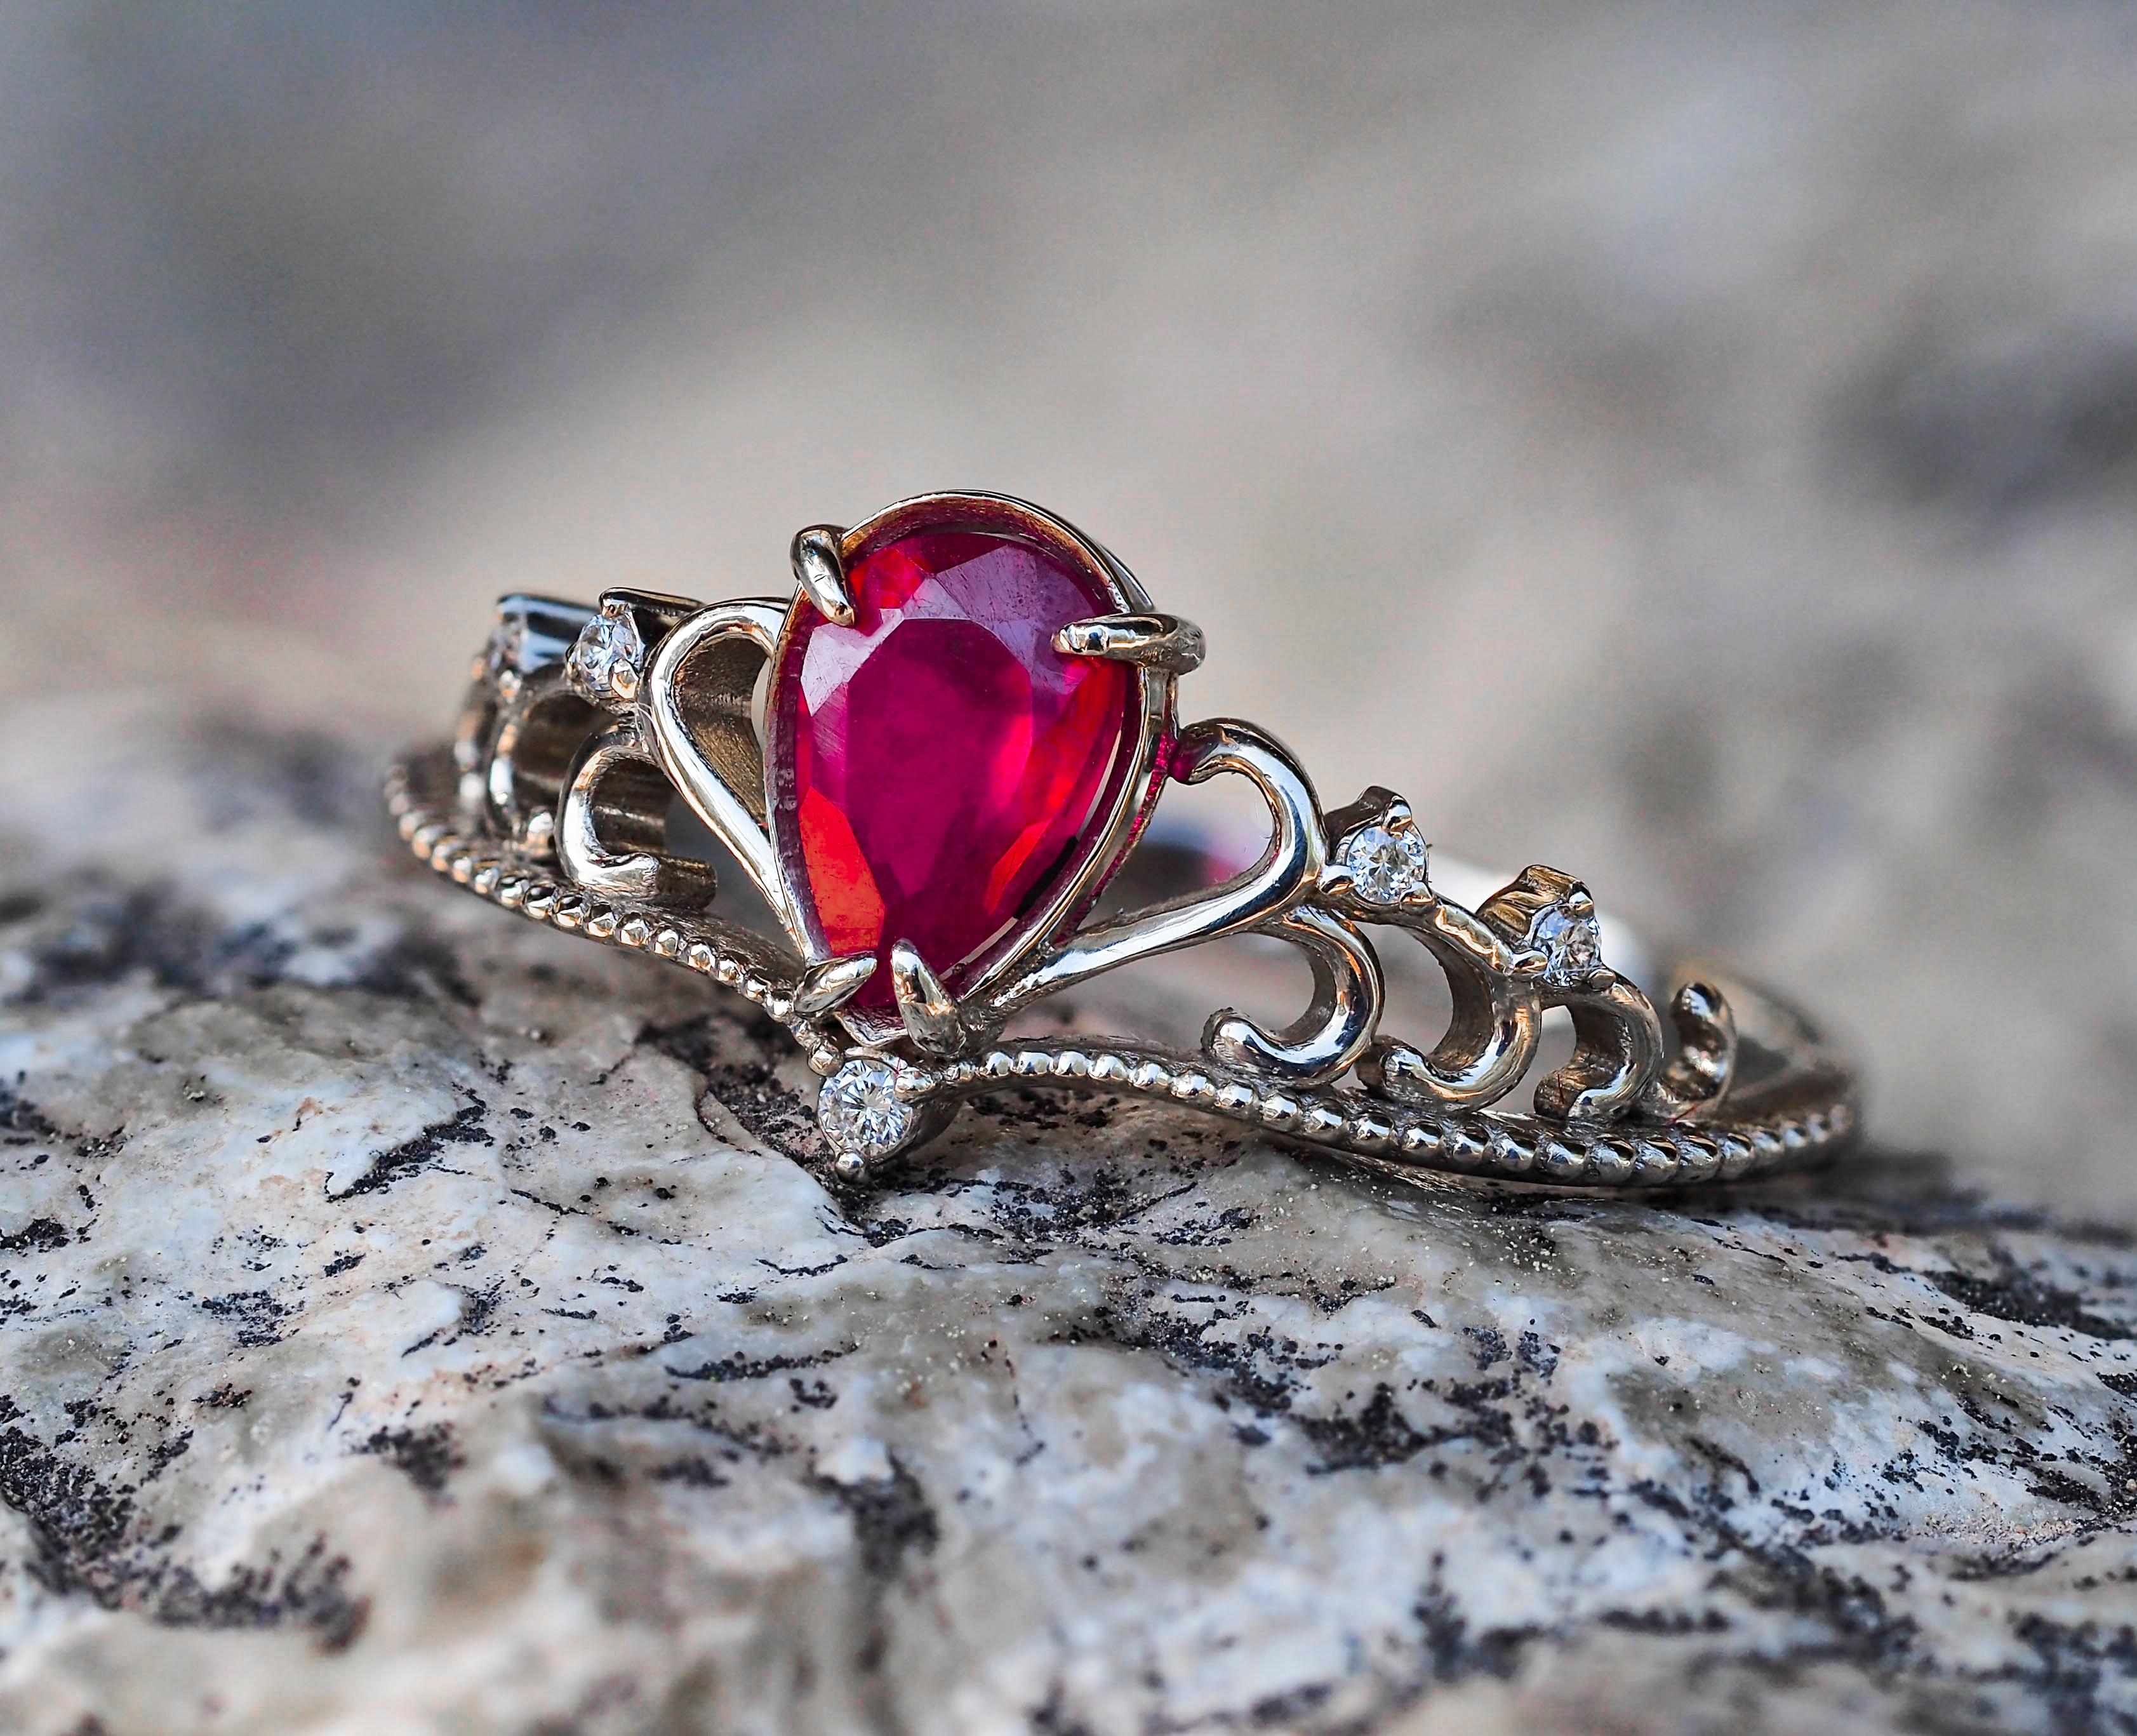 Tiara ring with ruby. 
Pear ruby 14k gold ring. Dainty ruby ring. Crown ring with ruby. July birthstone ring. Genuine ruby ring.

Metal: 14k gold
Weight: 1.9 g. depends from size.

Central stone: Ruby
Cut: Pear
Weight: aprx 0.7 ct.
Color: Red